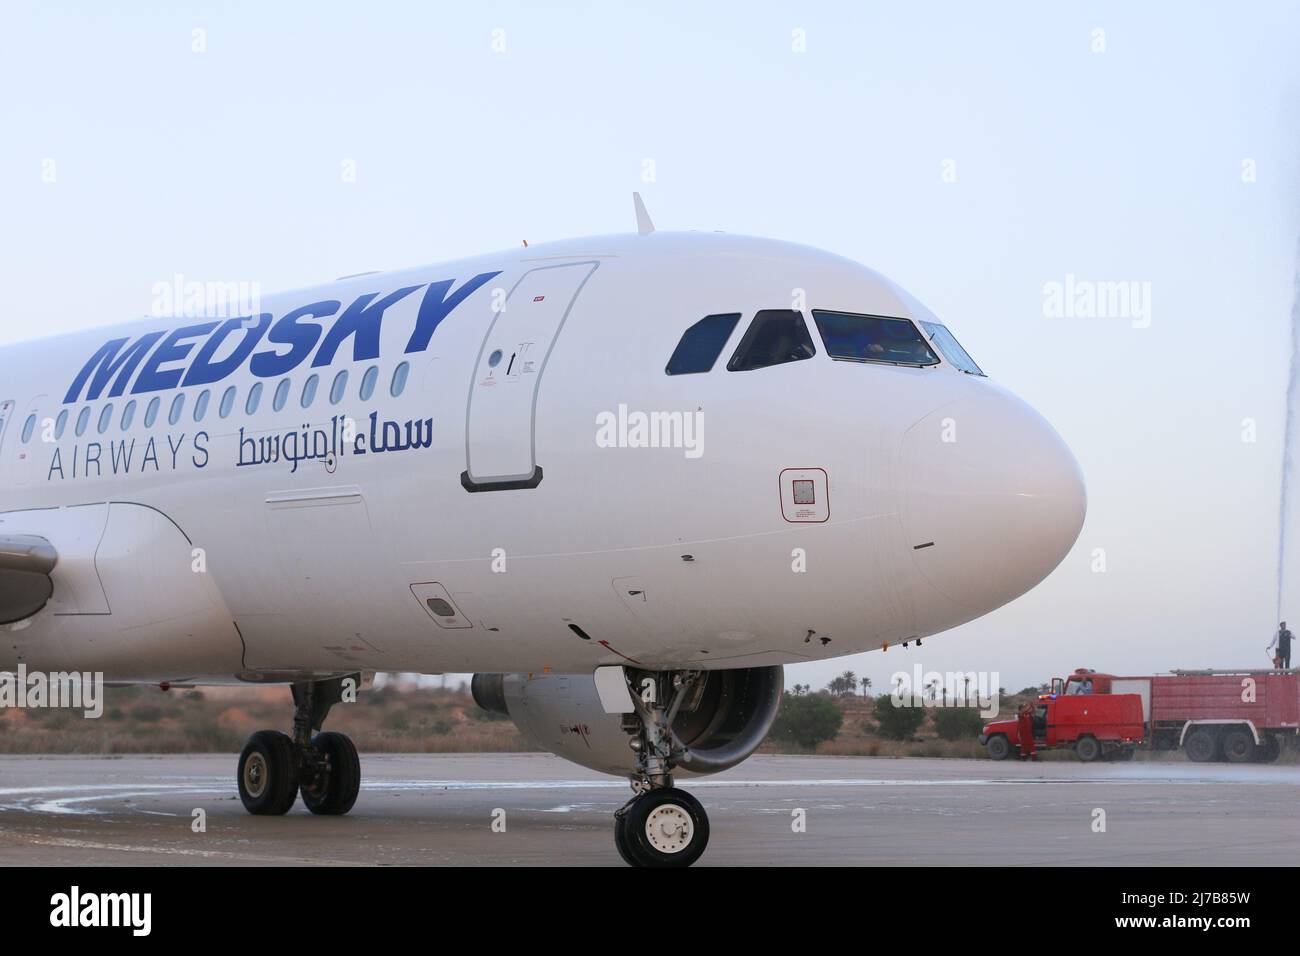 A view of a private Libyan airline Medsky at Misrata International Airport, Flights between the Europe union countries had been suspended for eight years due to the conflict in Libya (Photo by Islam Alatrash / SOPA Images/Sipa USA) Stock Photo